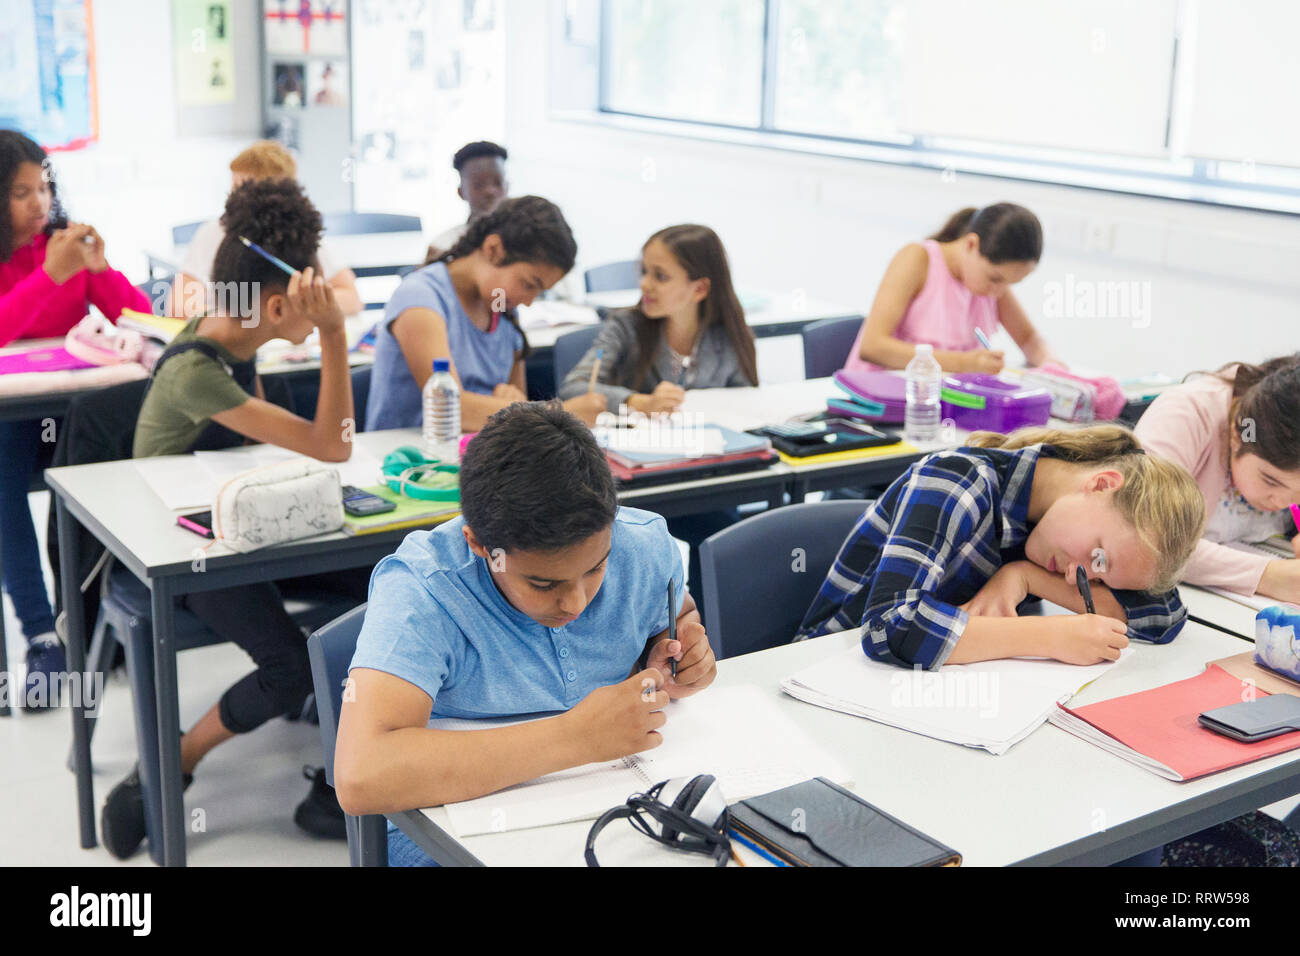 Junior high school students studying at desks in classroom Stock Photo